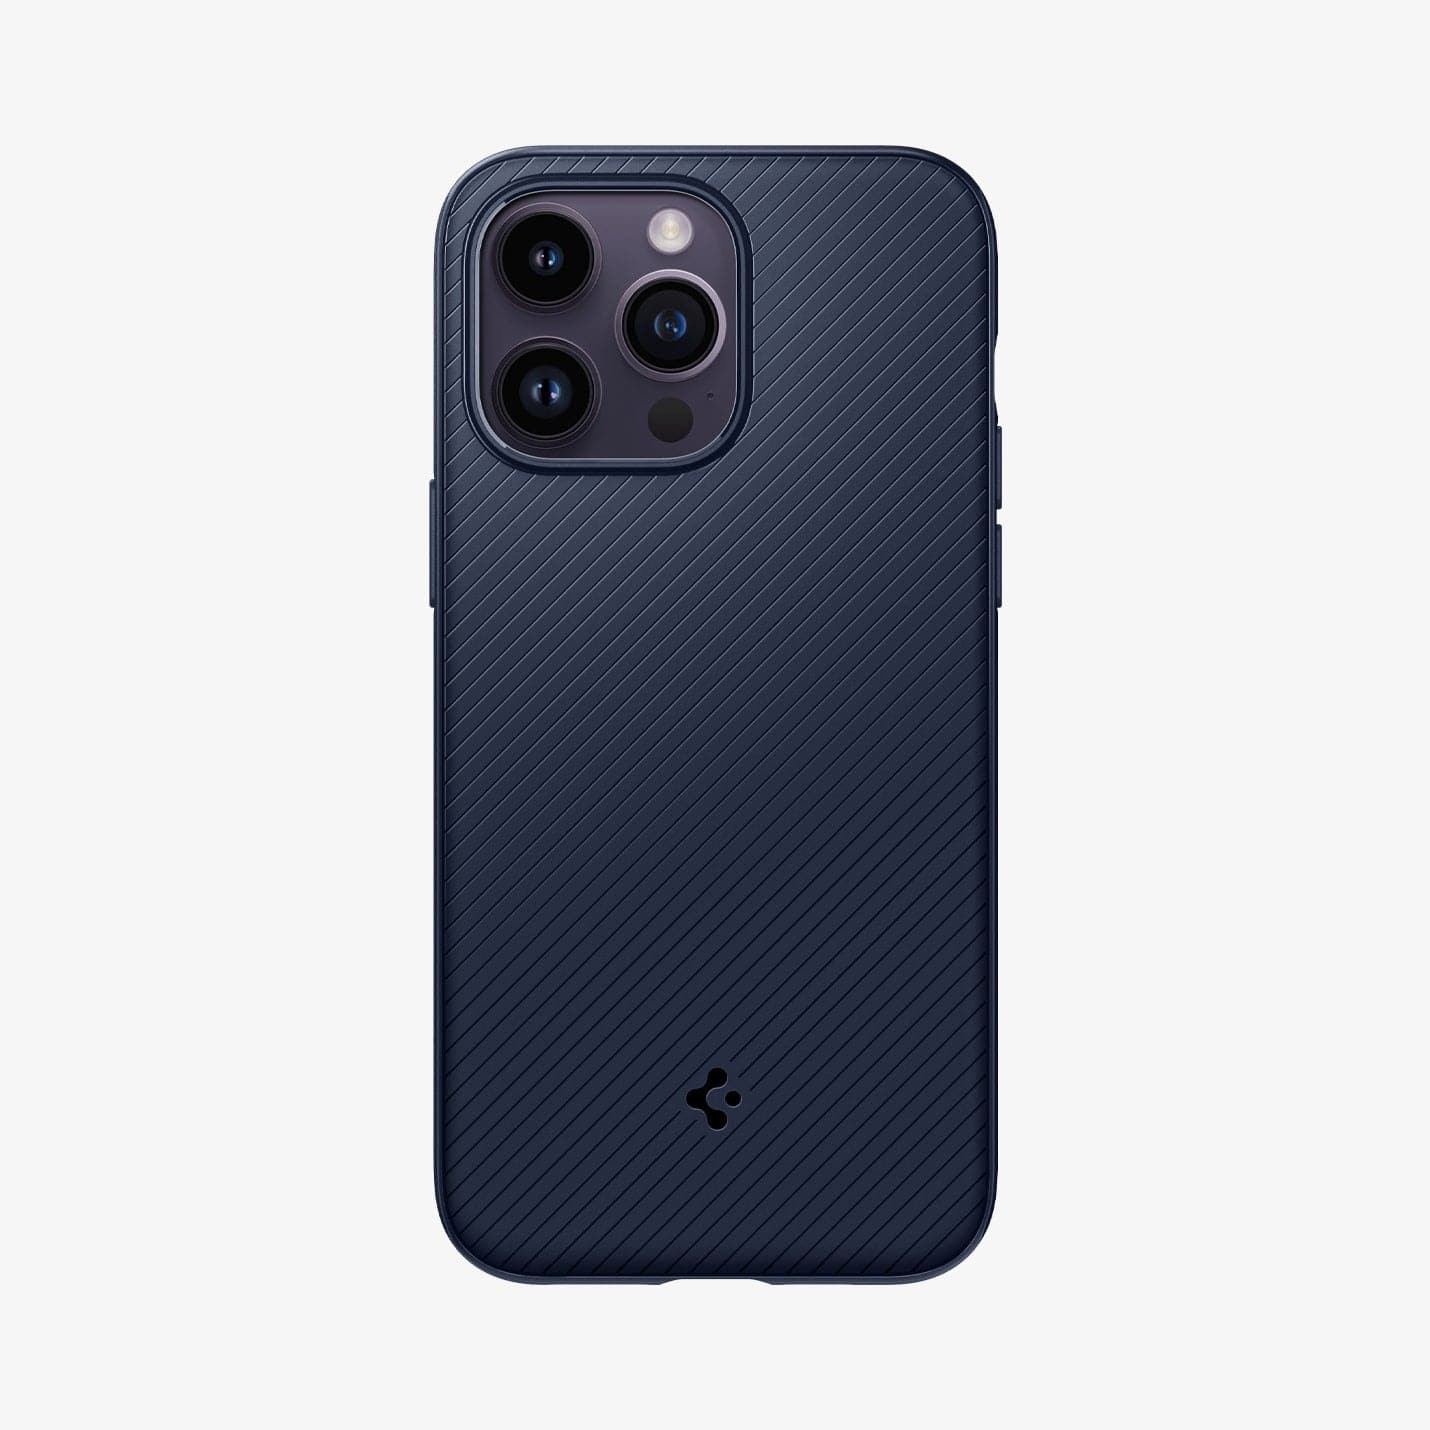 ACS04845 - iPhone 14 Pro Max Case Mag Armor (MagFit) in navy blue showing the back